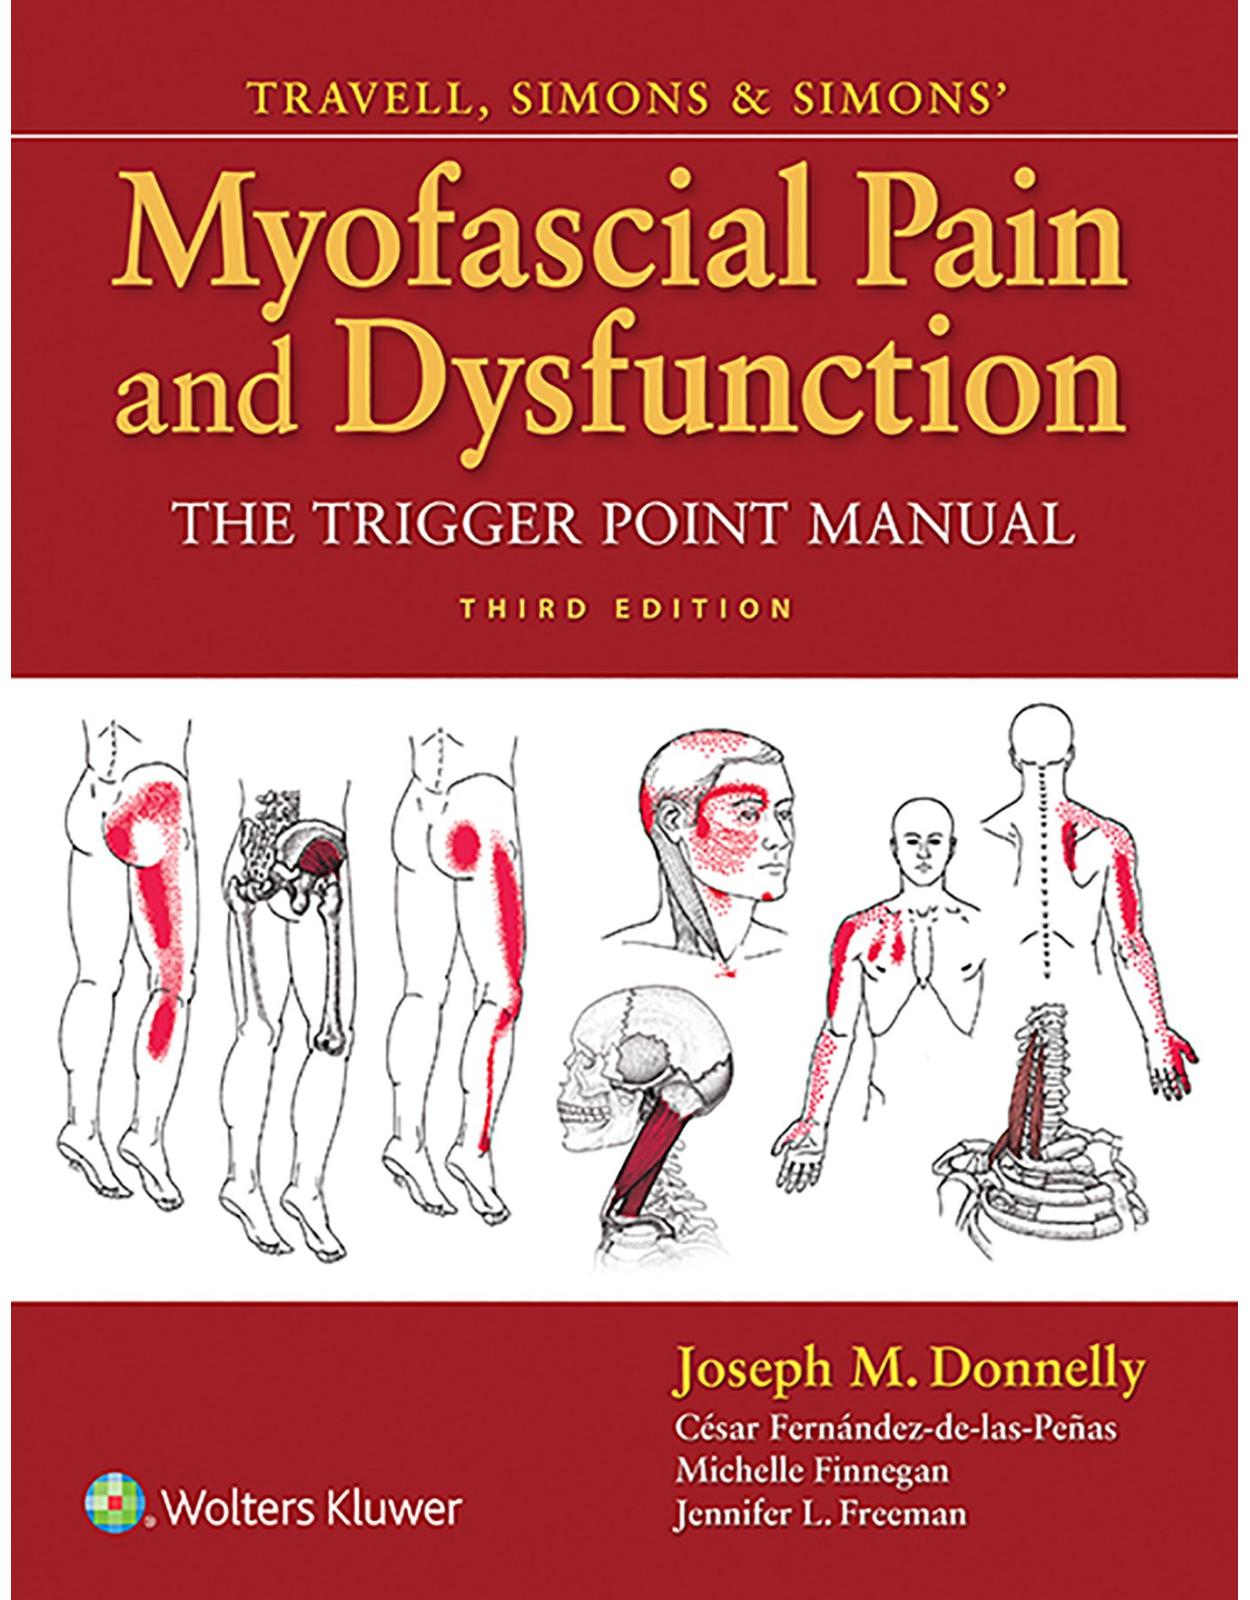 Travell and Simons’ Myofascial Pain and Dysfunction: The Trigger Point Manual